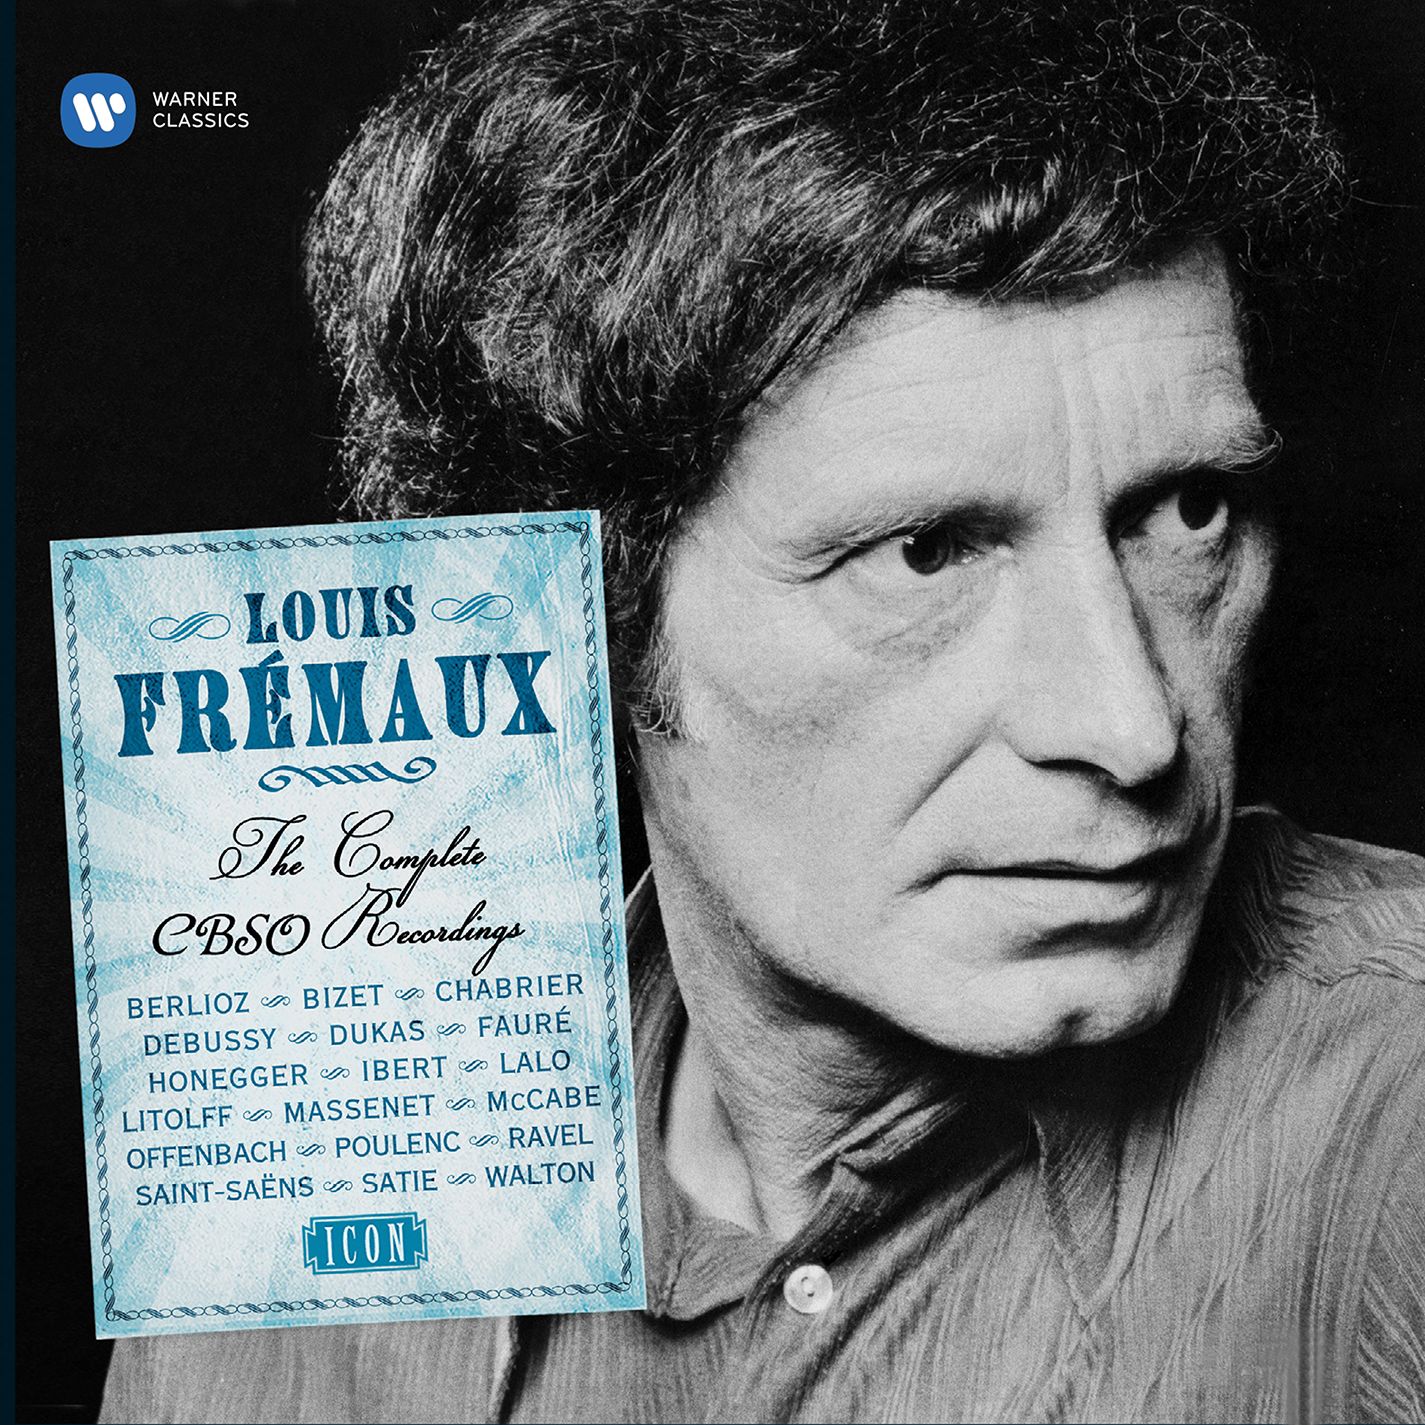 Louis Fre maux  The Complete CBSO Recordings